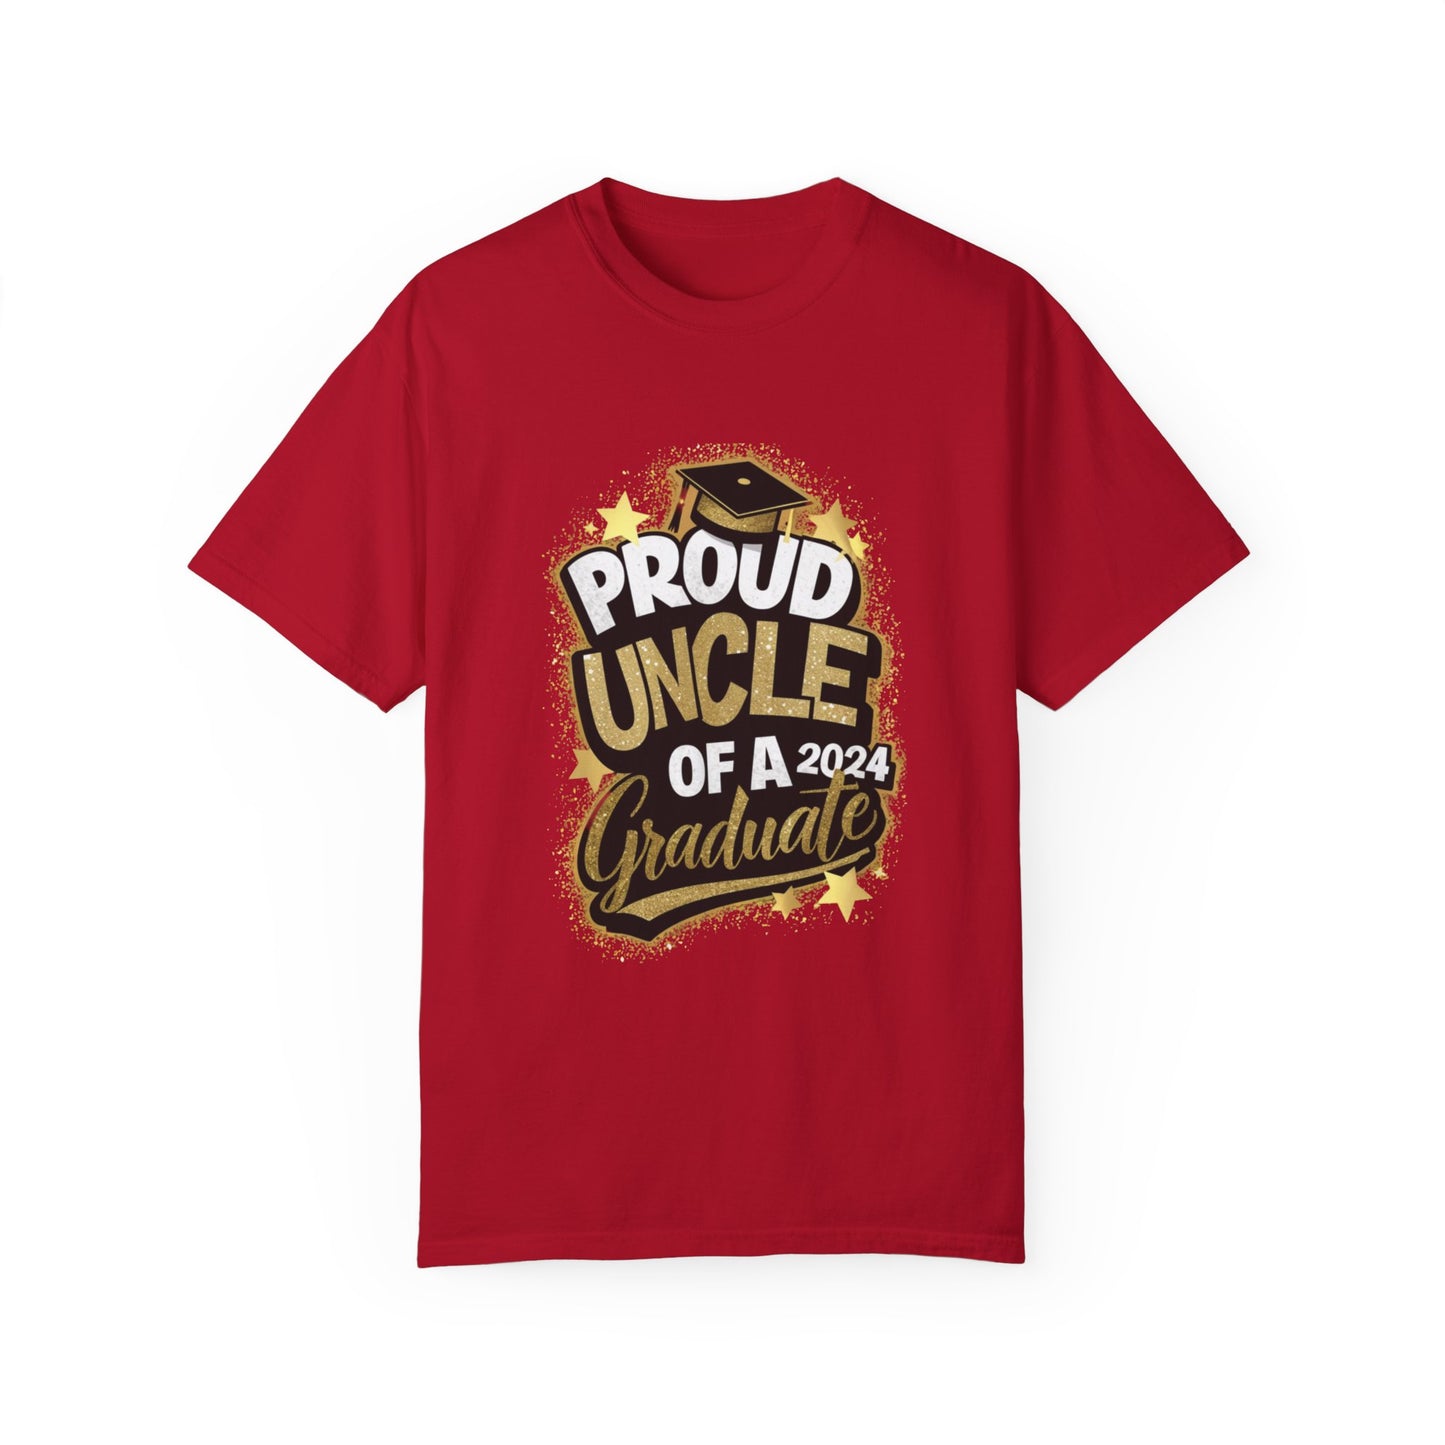 Proud Uncle of a 2024 Graduate Unisex Garment-dyed T-shirt Cotton Funny Humorous Graphic Soft Premium Unisex Men Women Red T-shirt Birthday Gift-2